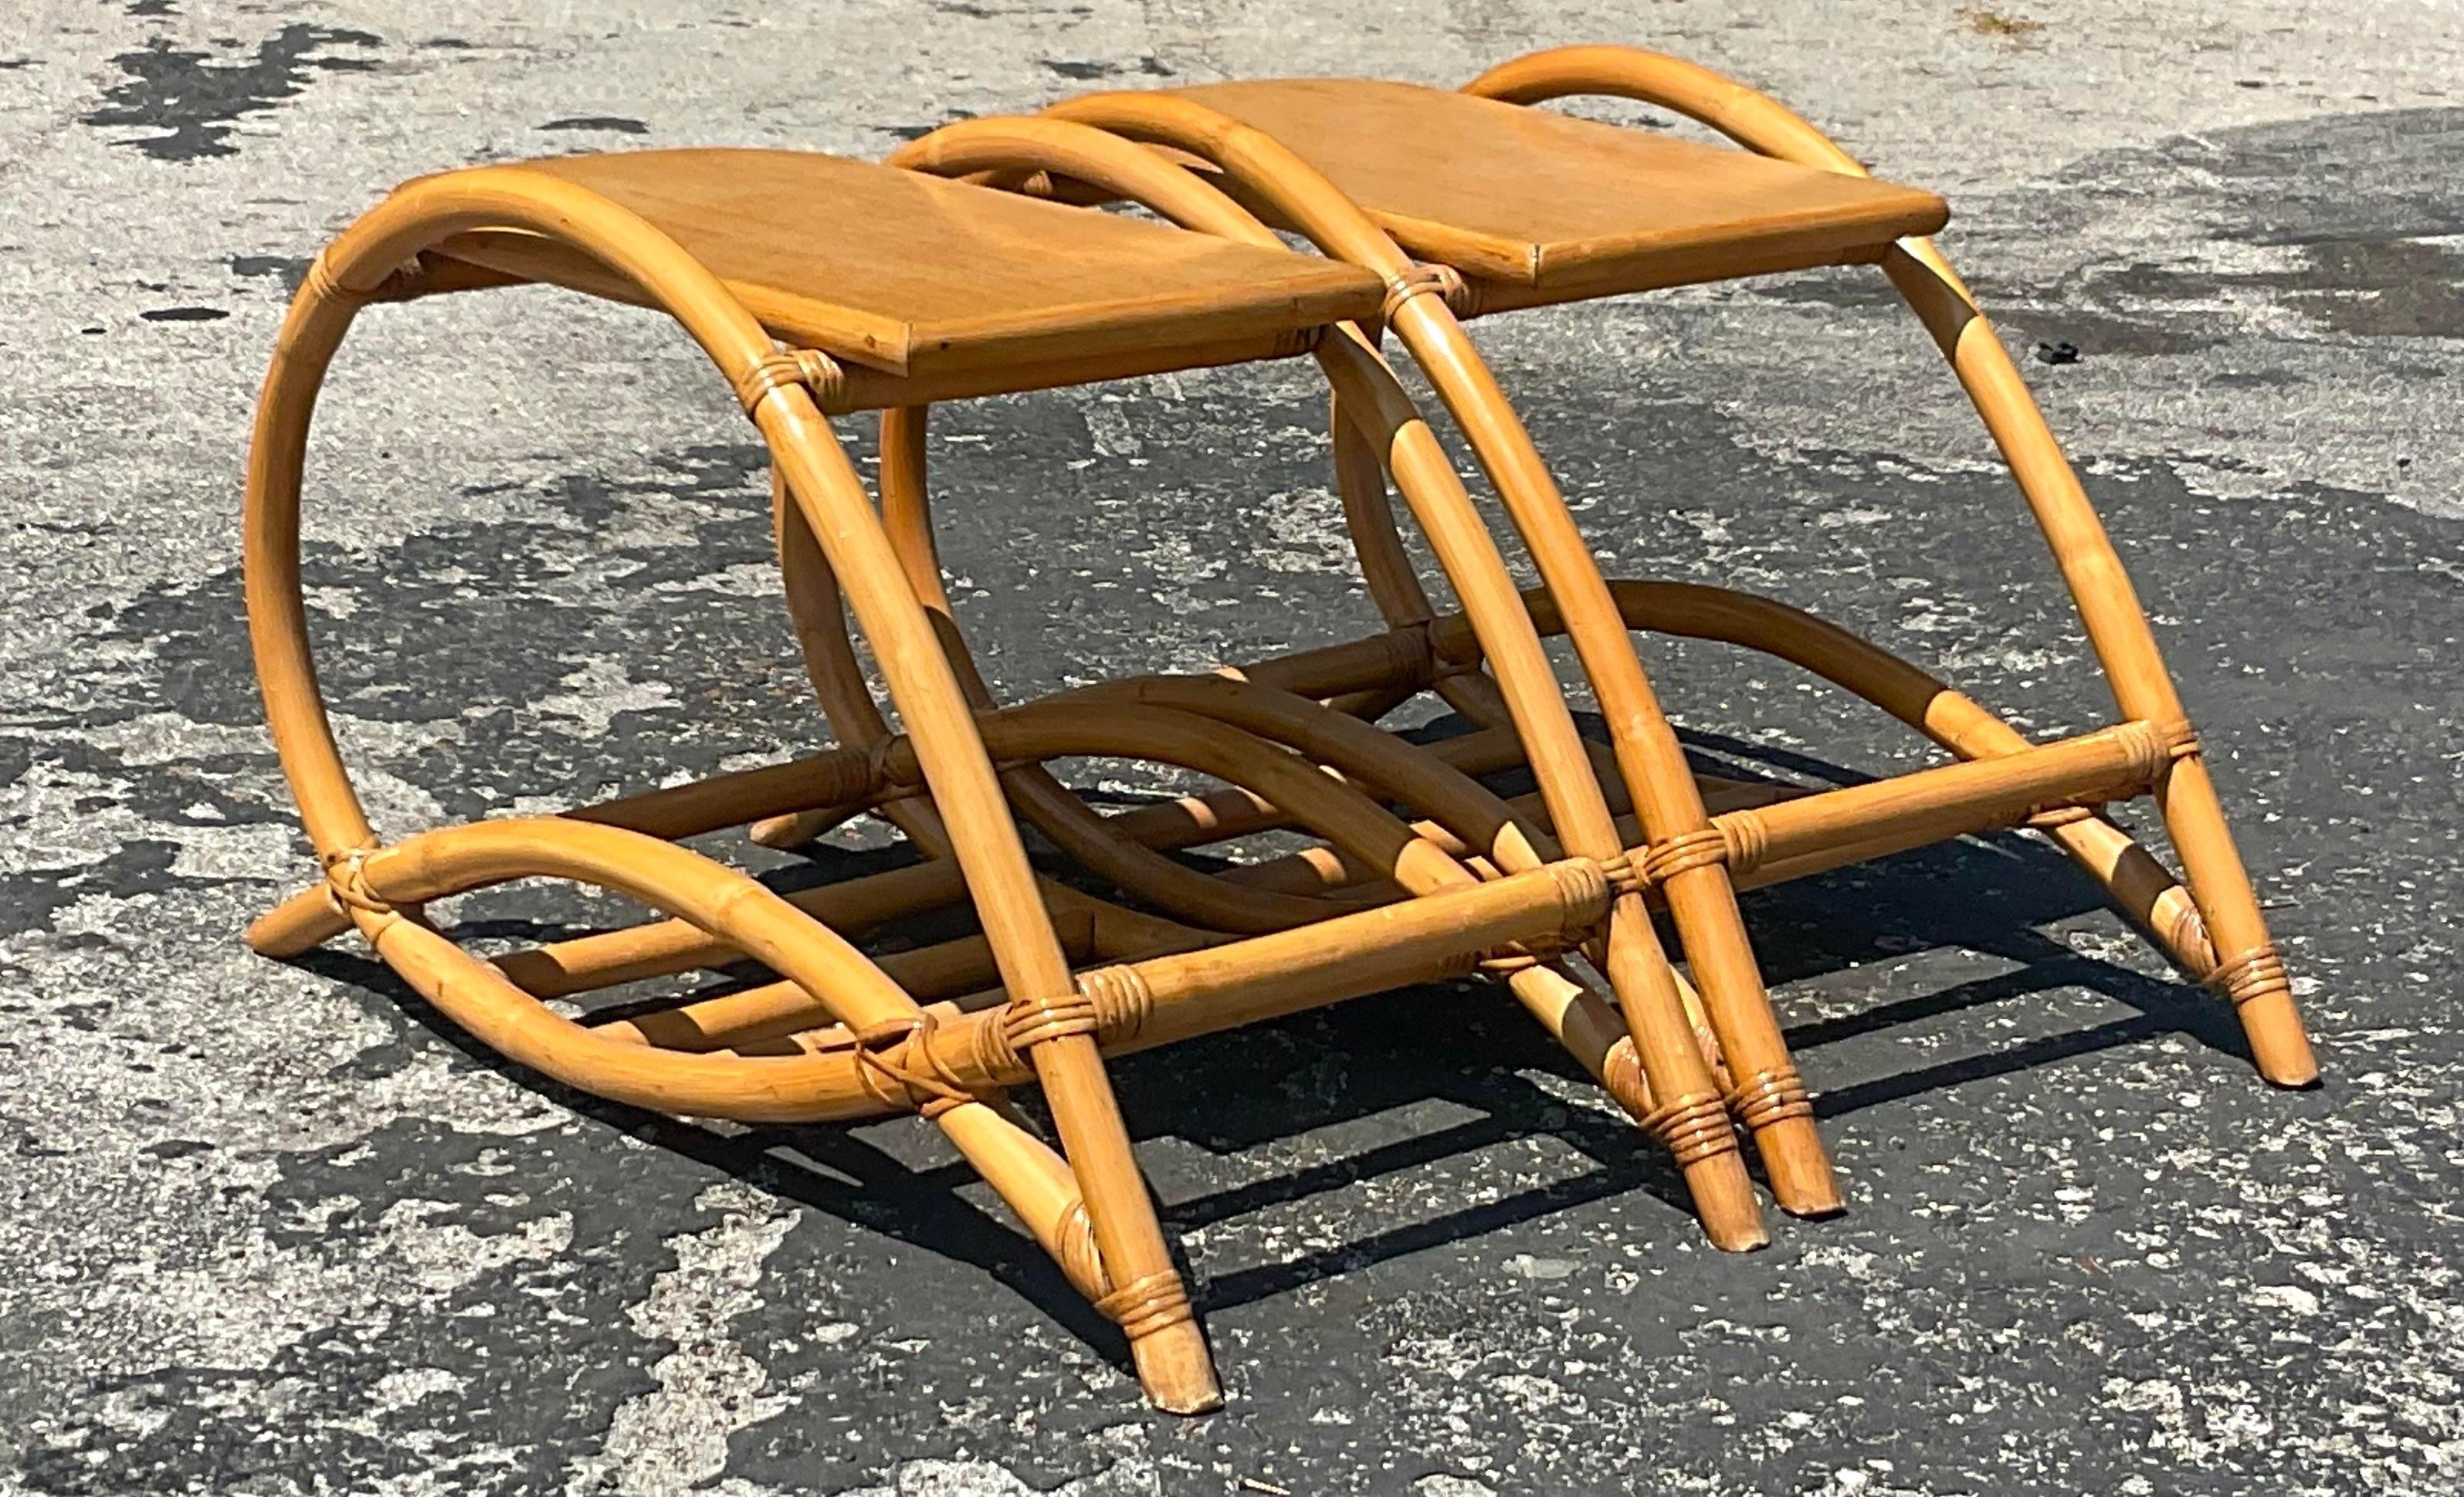 A fabulous vintage Coastal side tables. A chic loop design in a thick bent rattan. Laminate tops for easy maintenance. Perfect for that summer hospice with lots of entertaining! Acquired from a Palm Beach estate.